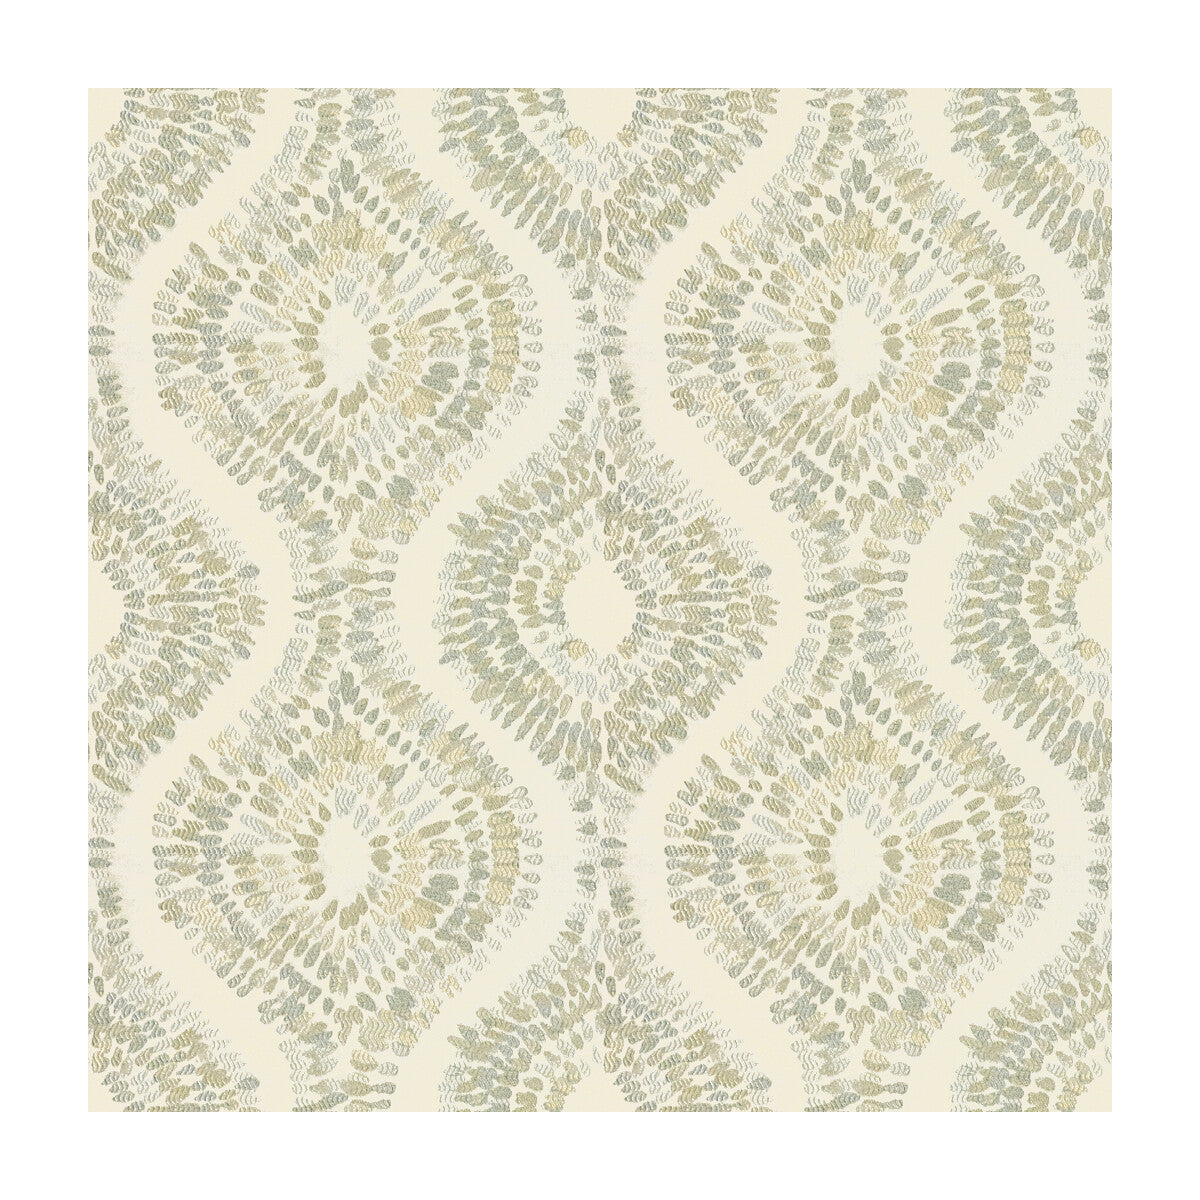 Sun Pillar fabric in breeze color - pattern 34178.116.0 - by Kravet Design in the Candice Olson collection